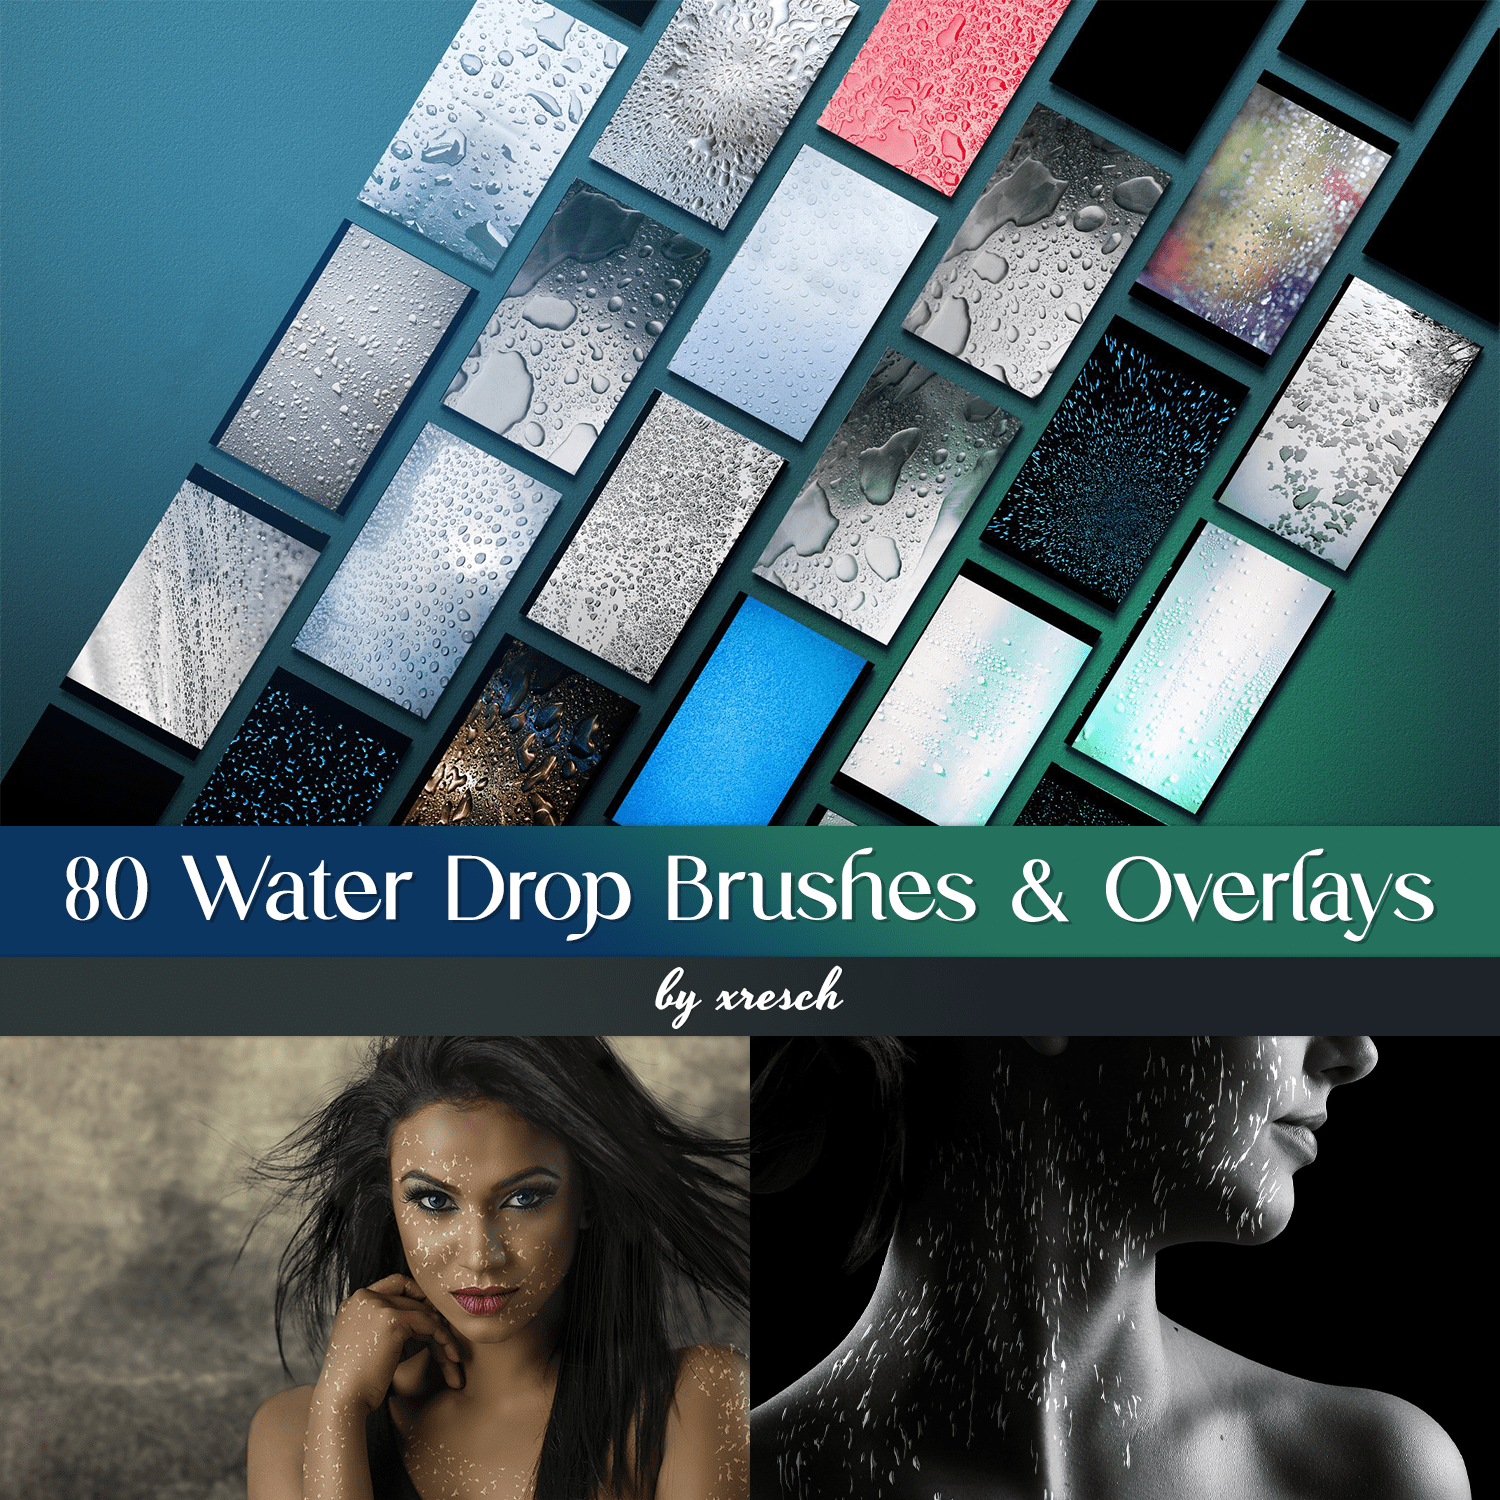 80 Water Drop Brushes & Overlays Cover.